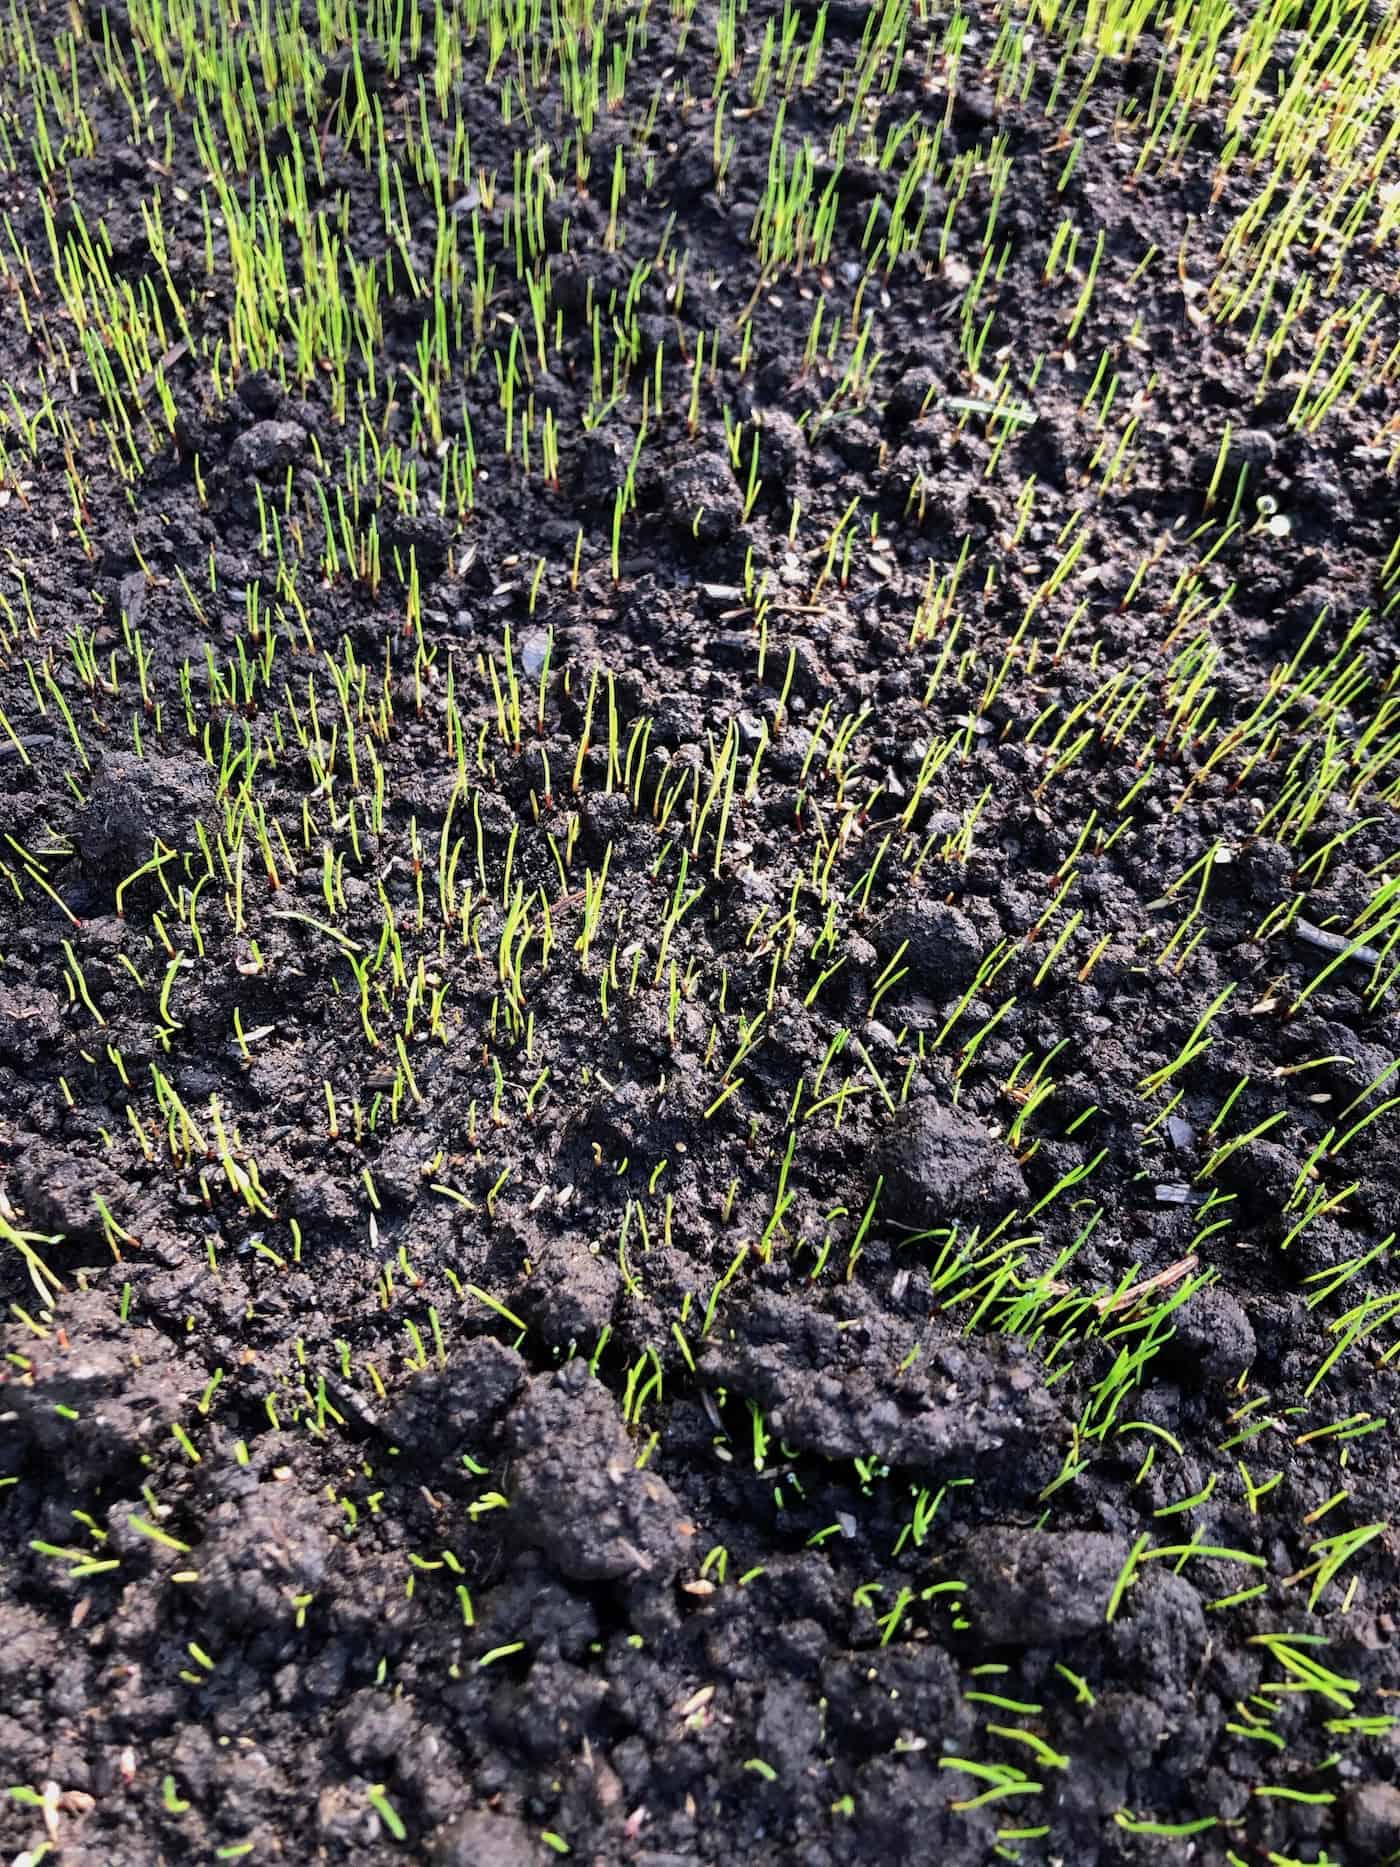 Grass seed growing in purchased lawn and garden soil